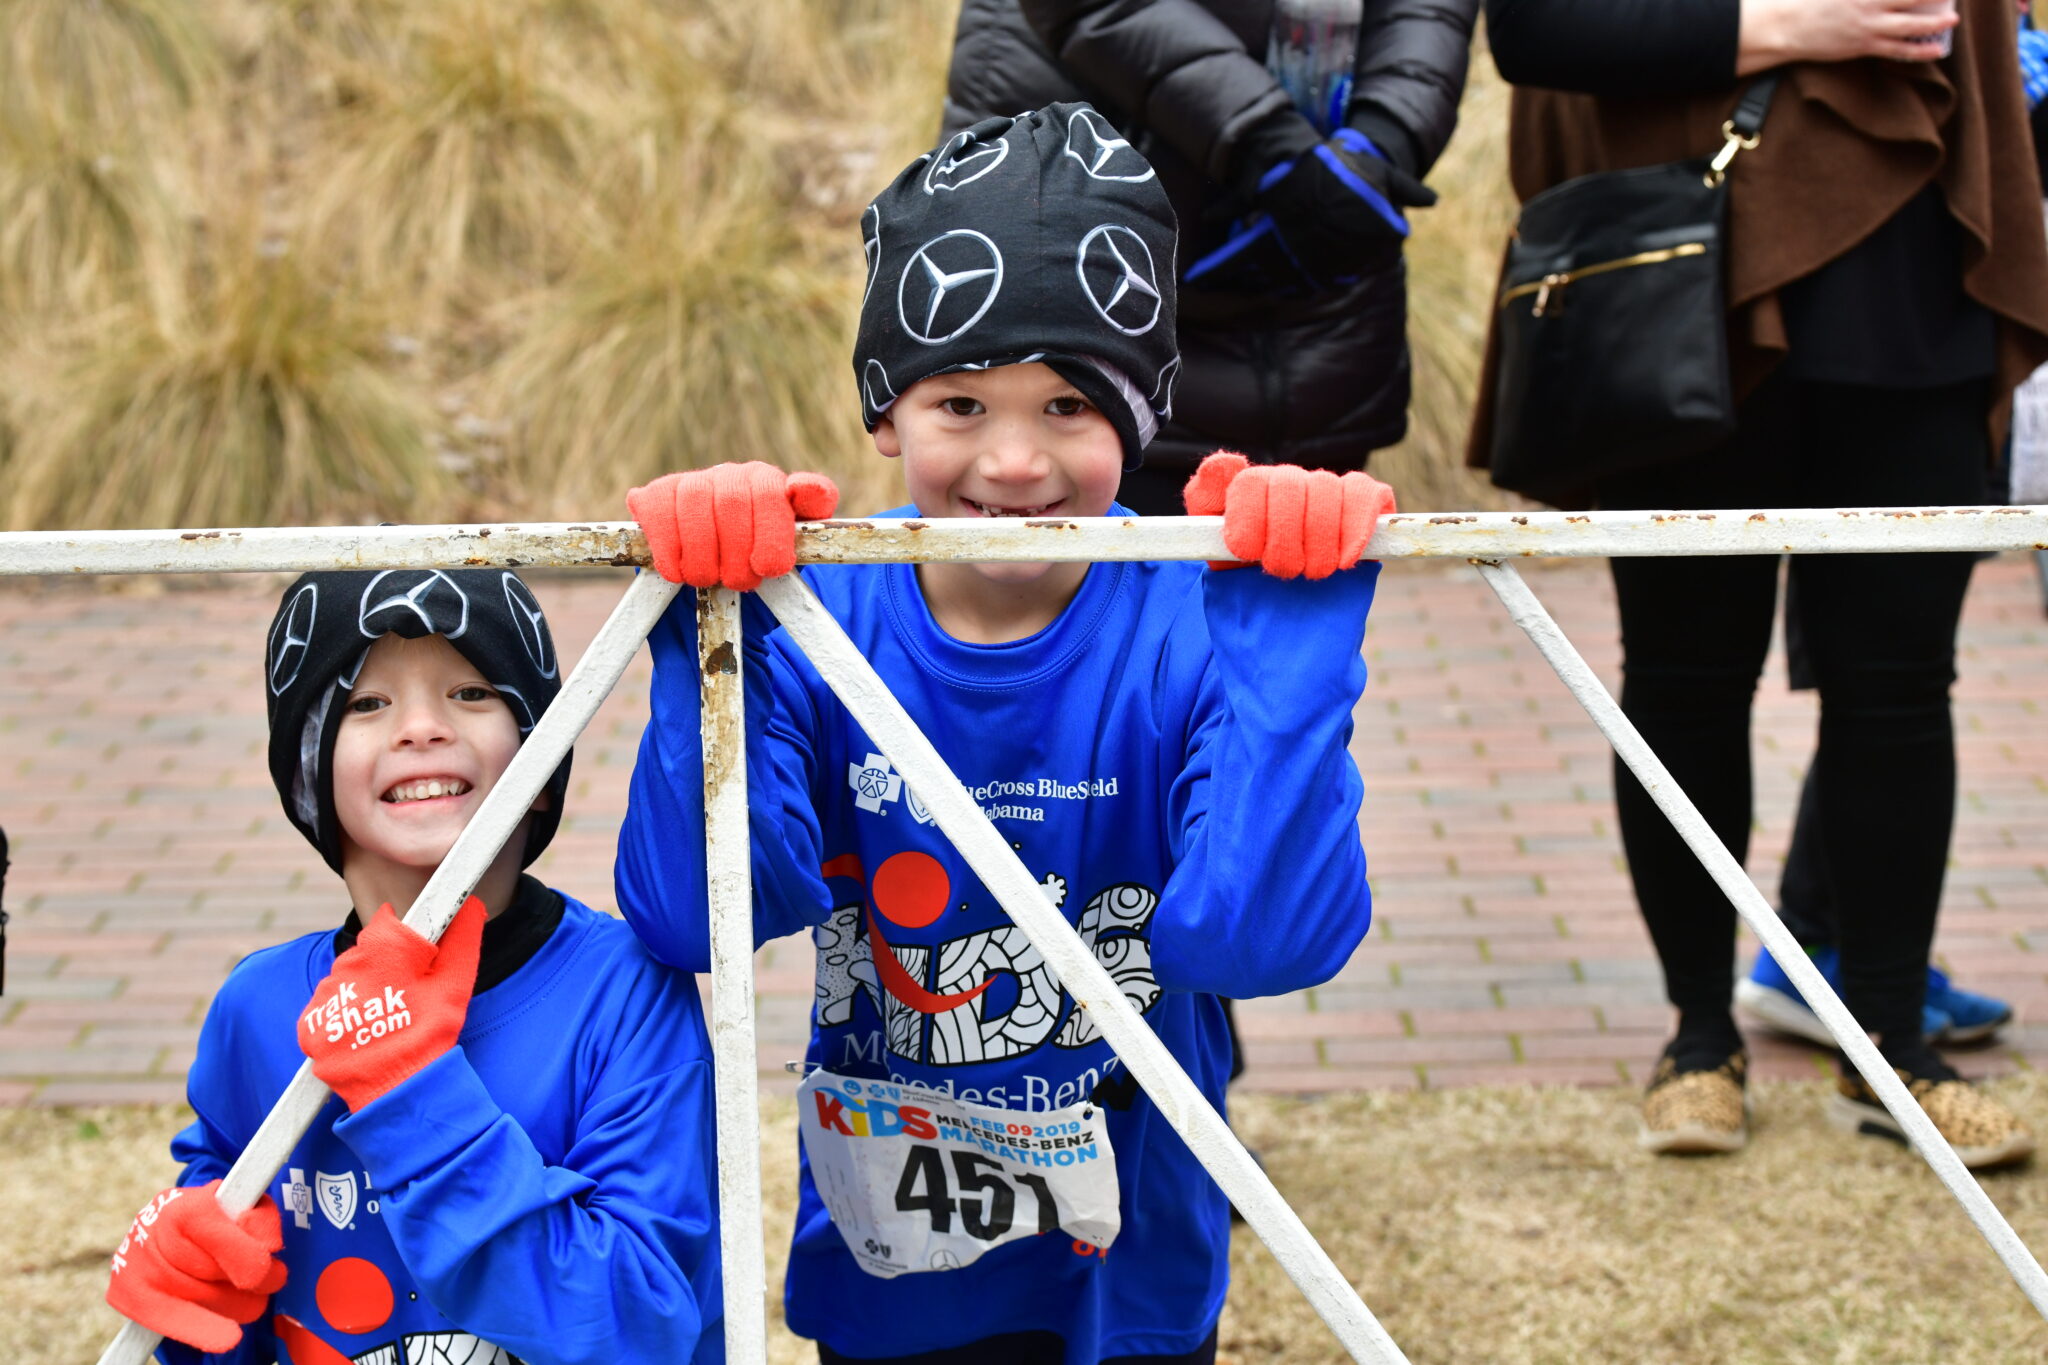 Parents, it’s time for your K-5th graders to run the Blue Cross and Blue Shield of Alabama Kids Mercedes-Benz Marathon—register by Nov. 30